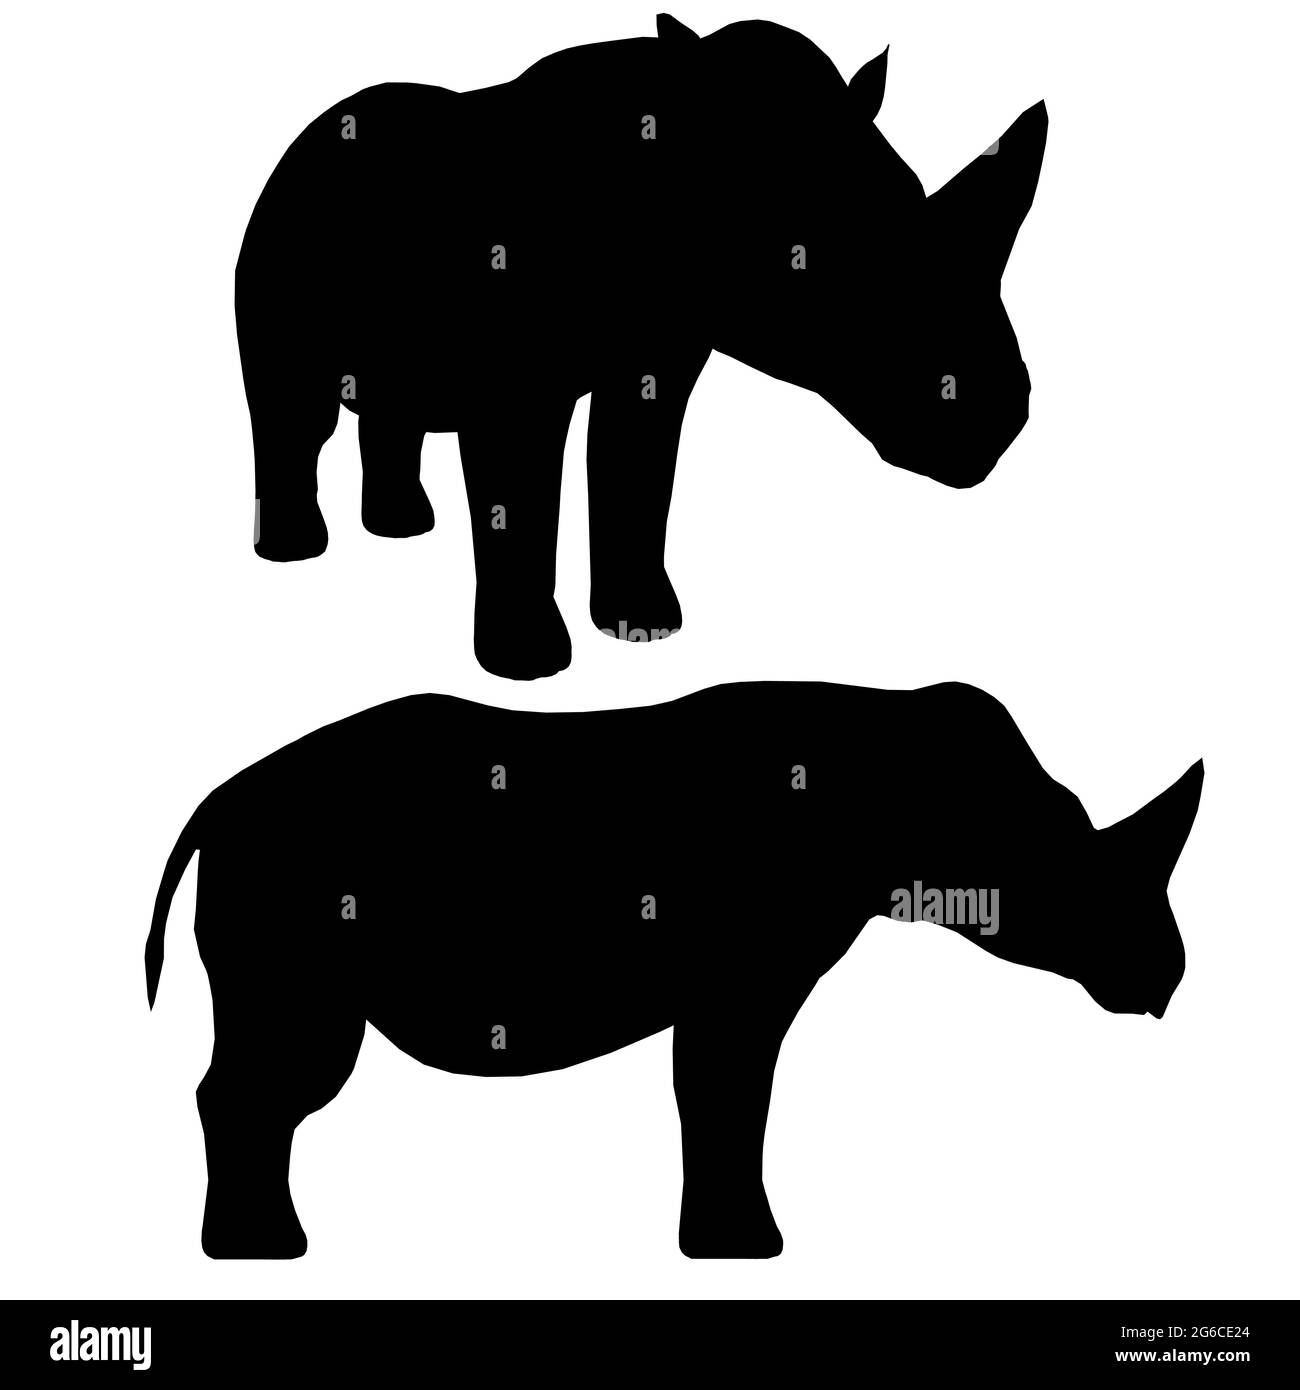 Rhino silhouette isolated on white background. Side view. Vector illustration. Stock Vector